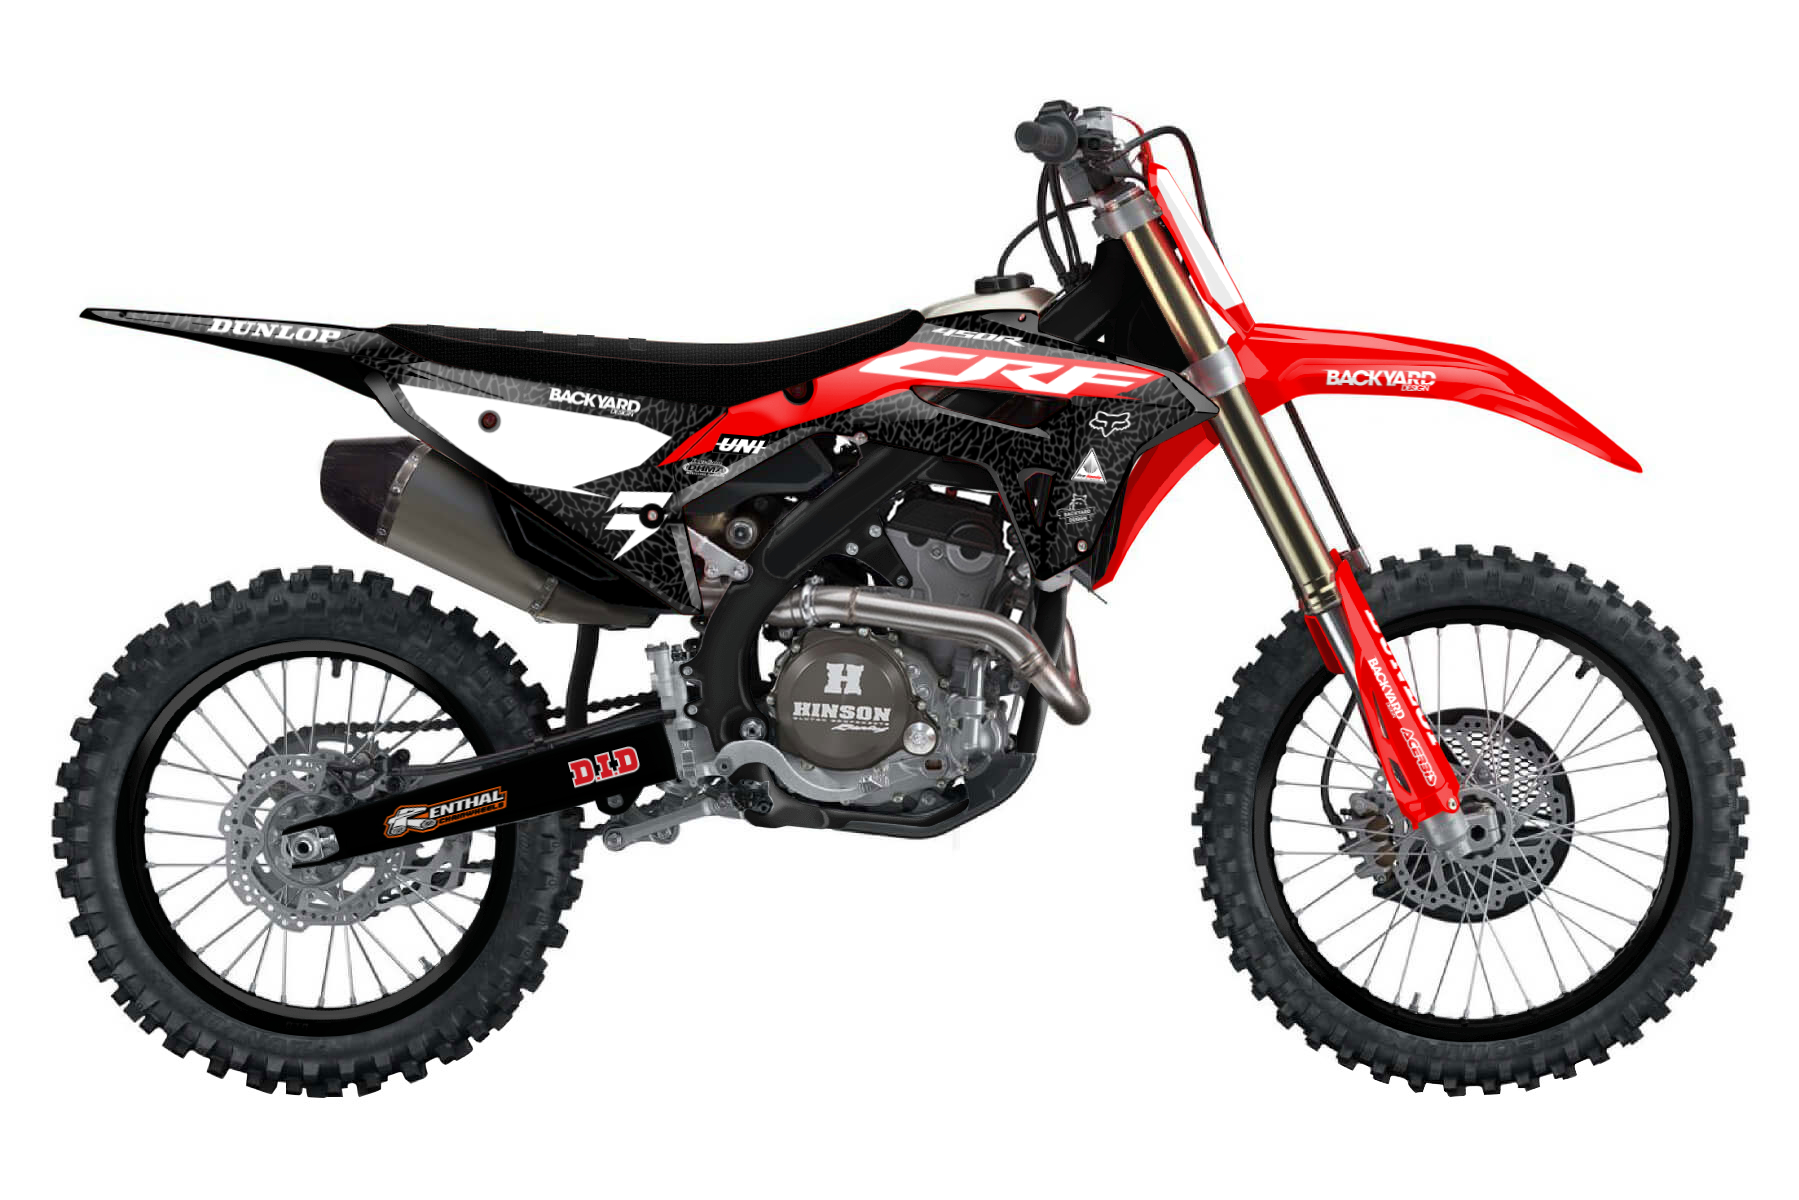 Honda CRF250R
Graphic Kits

The Honda CRF250R is powerful and versatile. This bike is also as light as possible and comes with a six speed transmission.